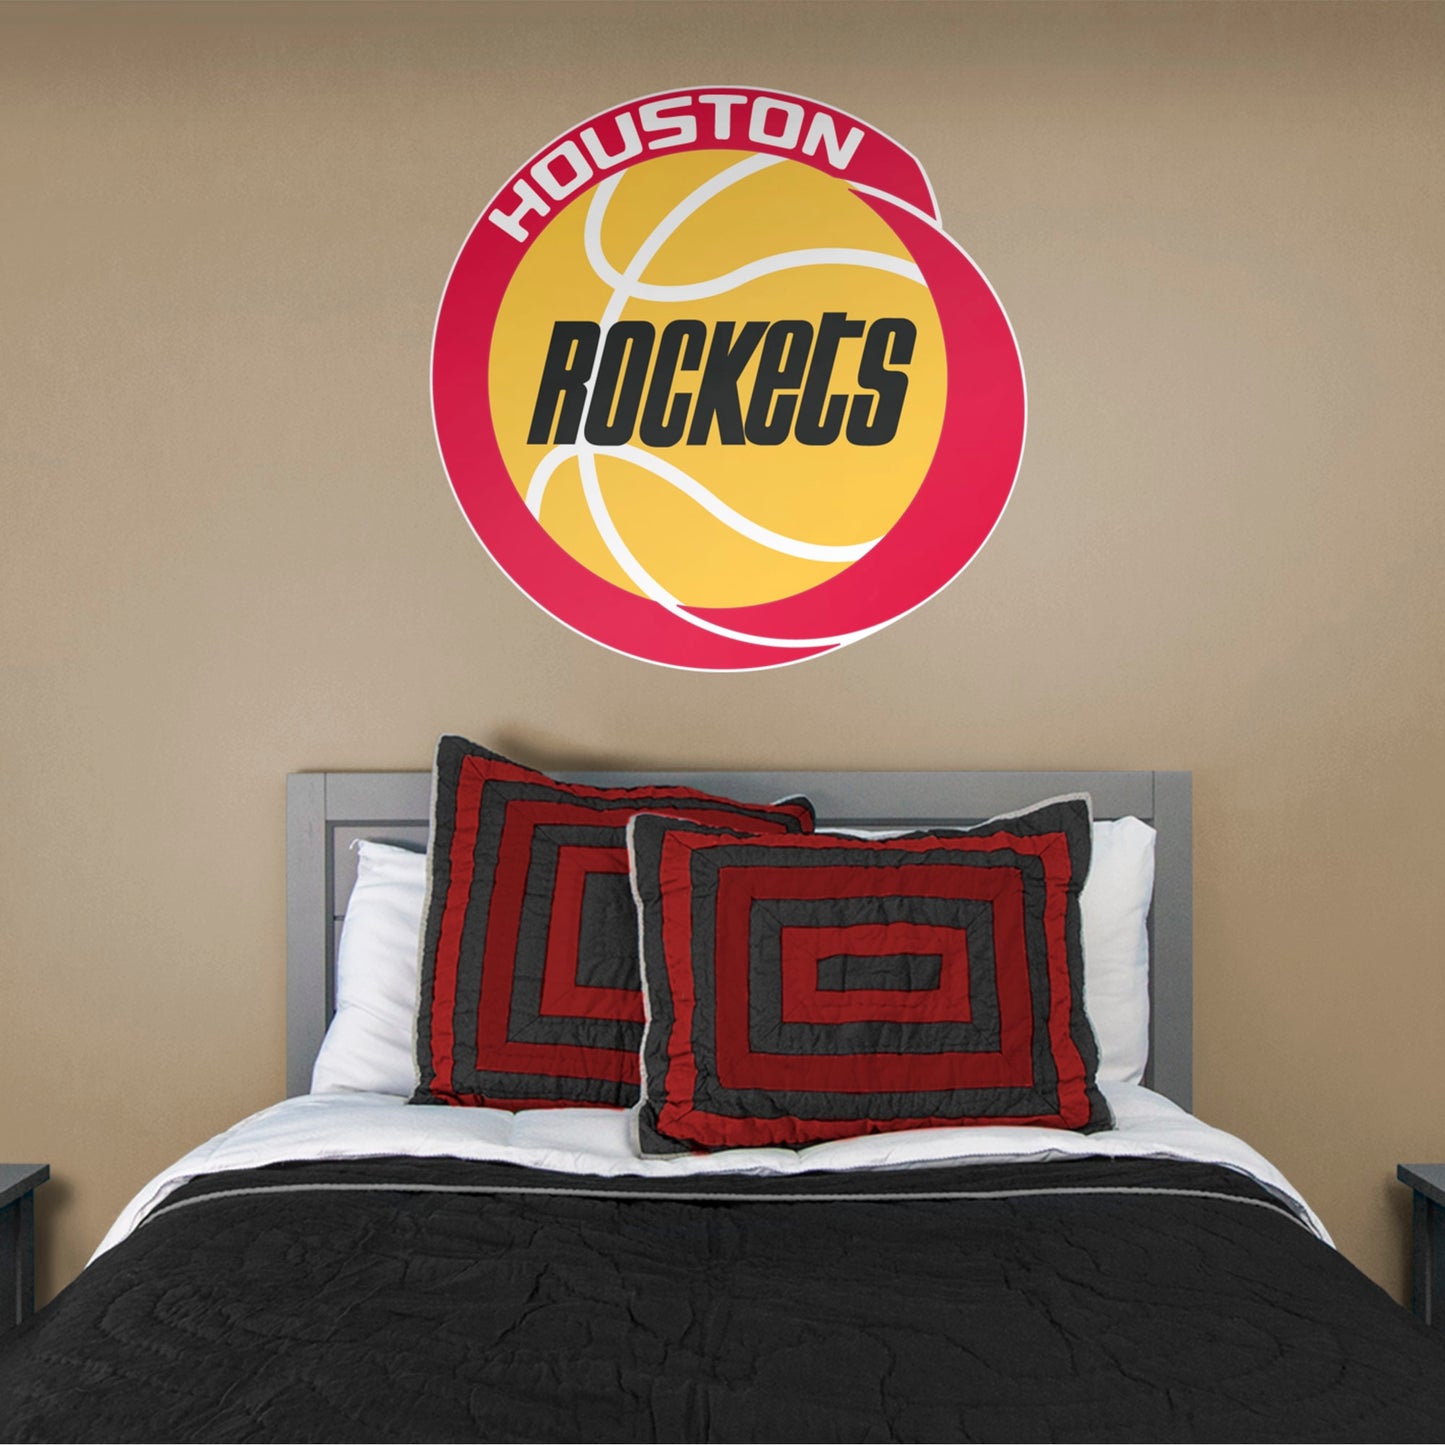 Houston Rockets: Classic Logo - Officially Licensed NBA Removable Wall Decal